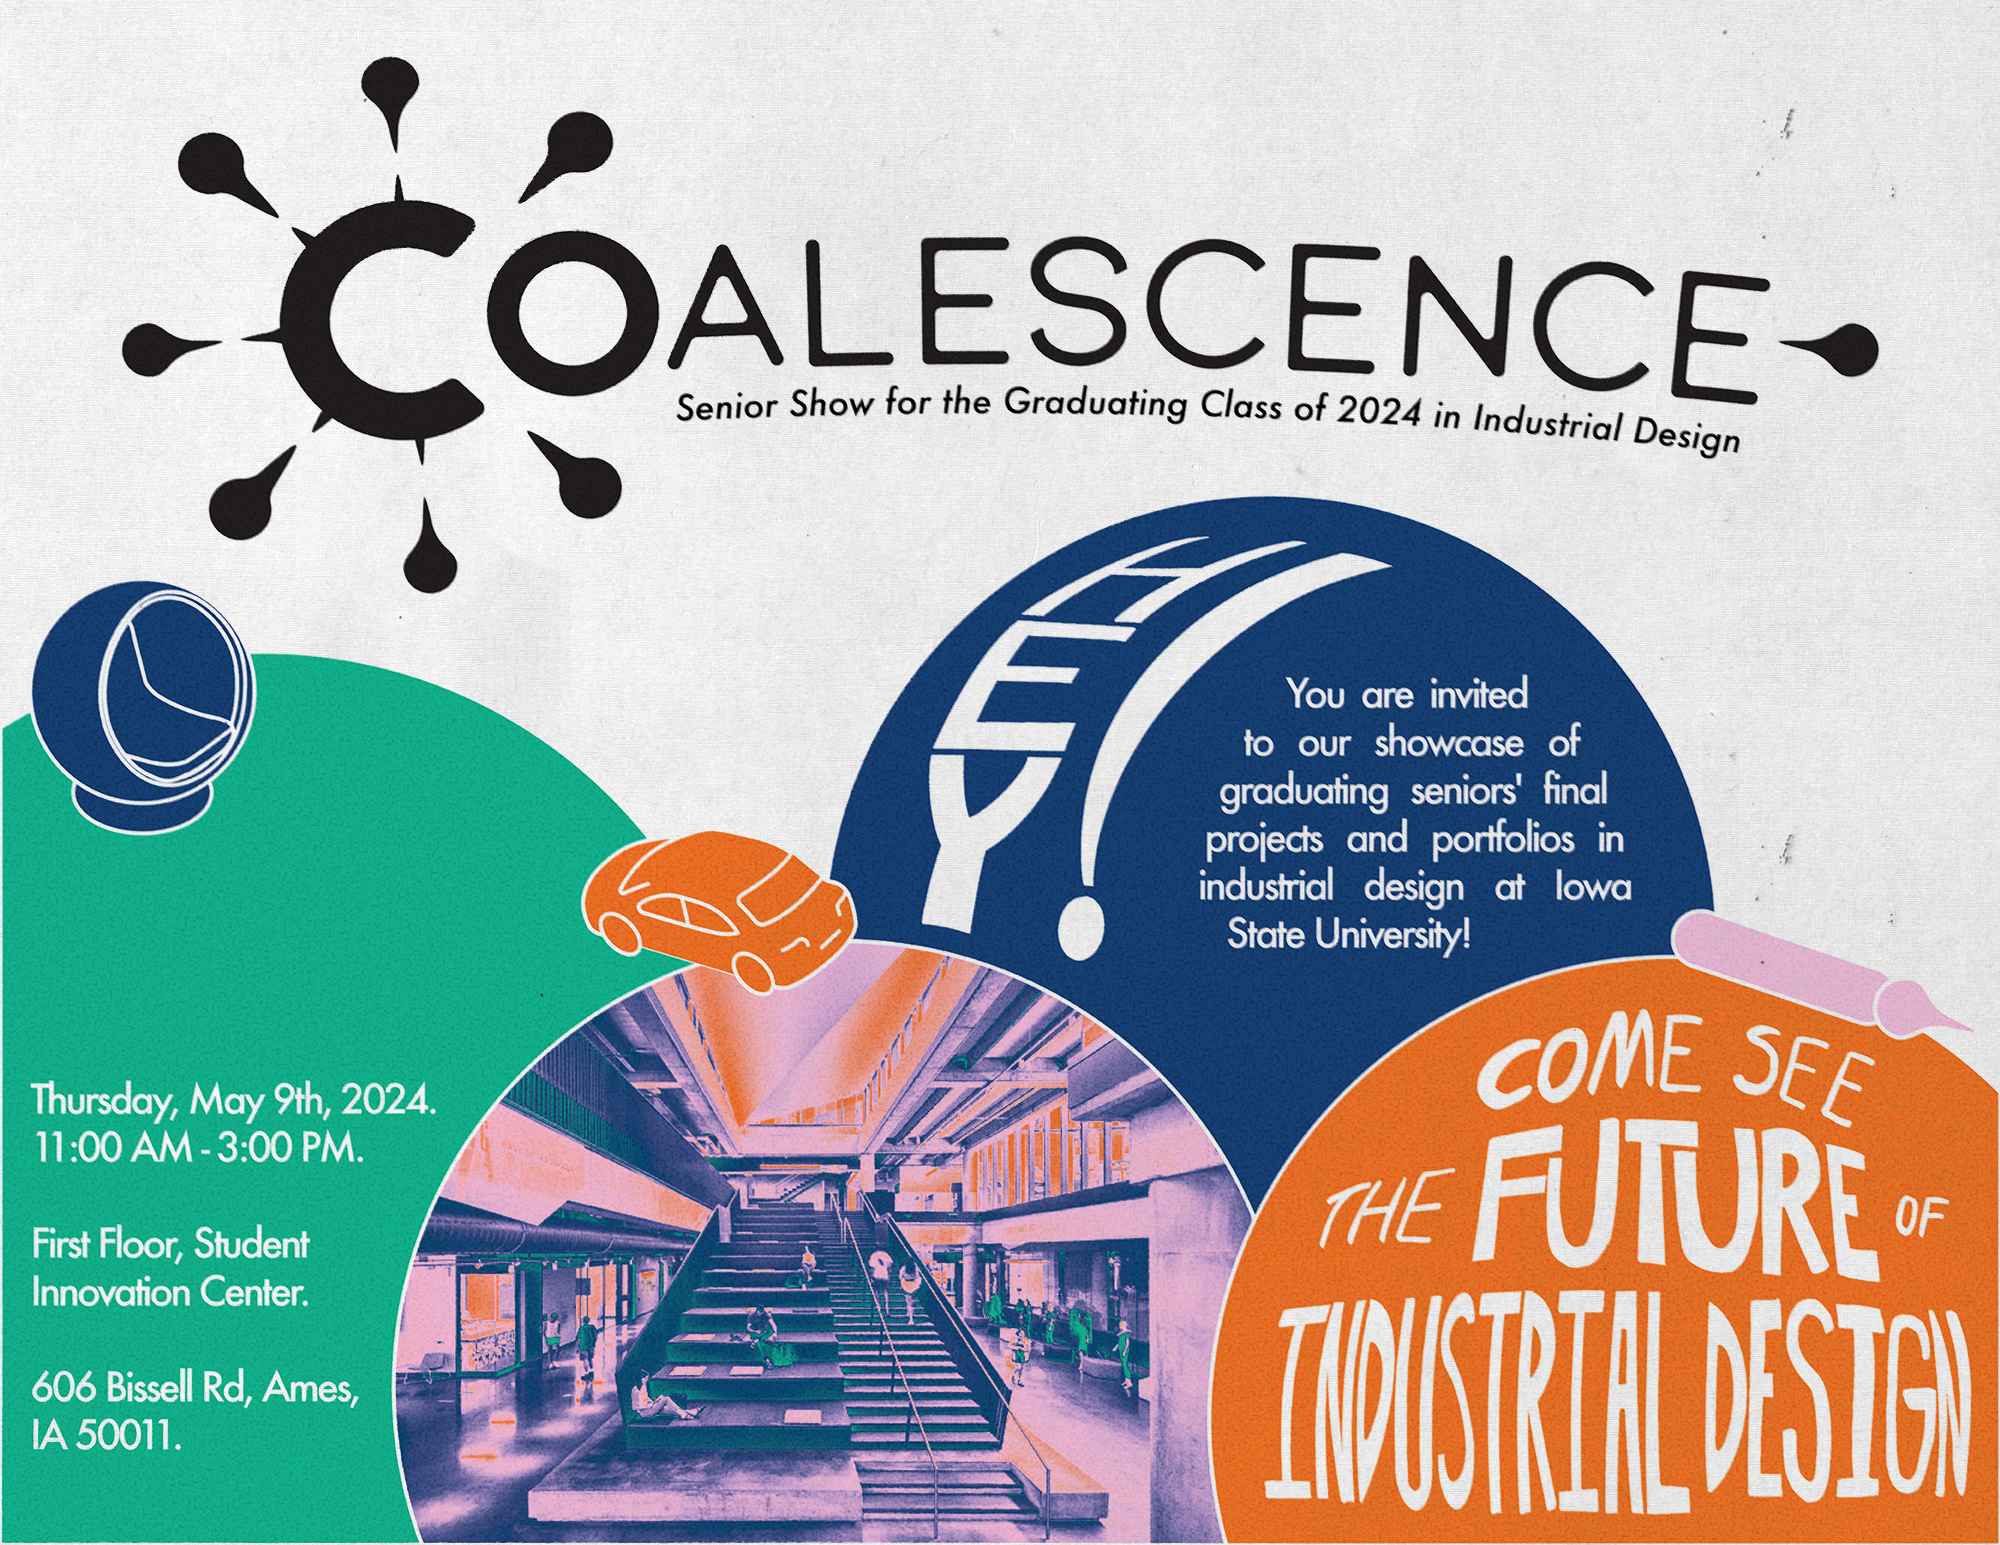 Coalescense, Senior Show for the Graduating Class of 2024 in Industrial Design poster